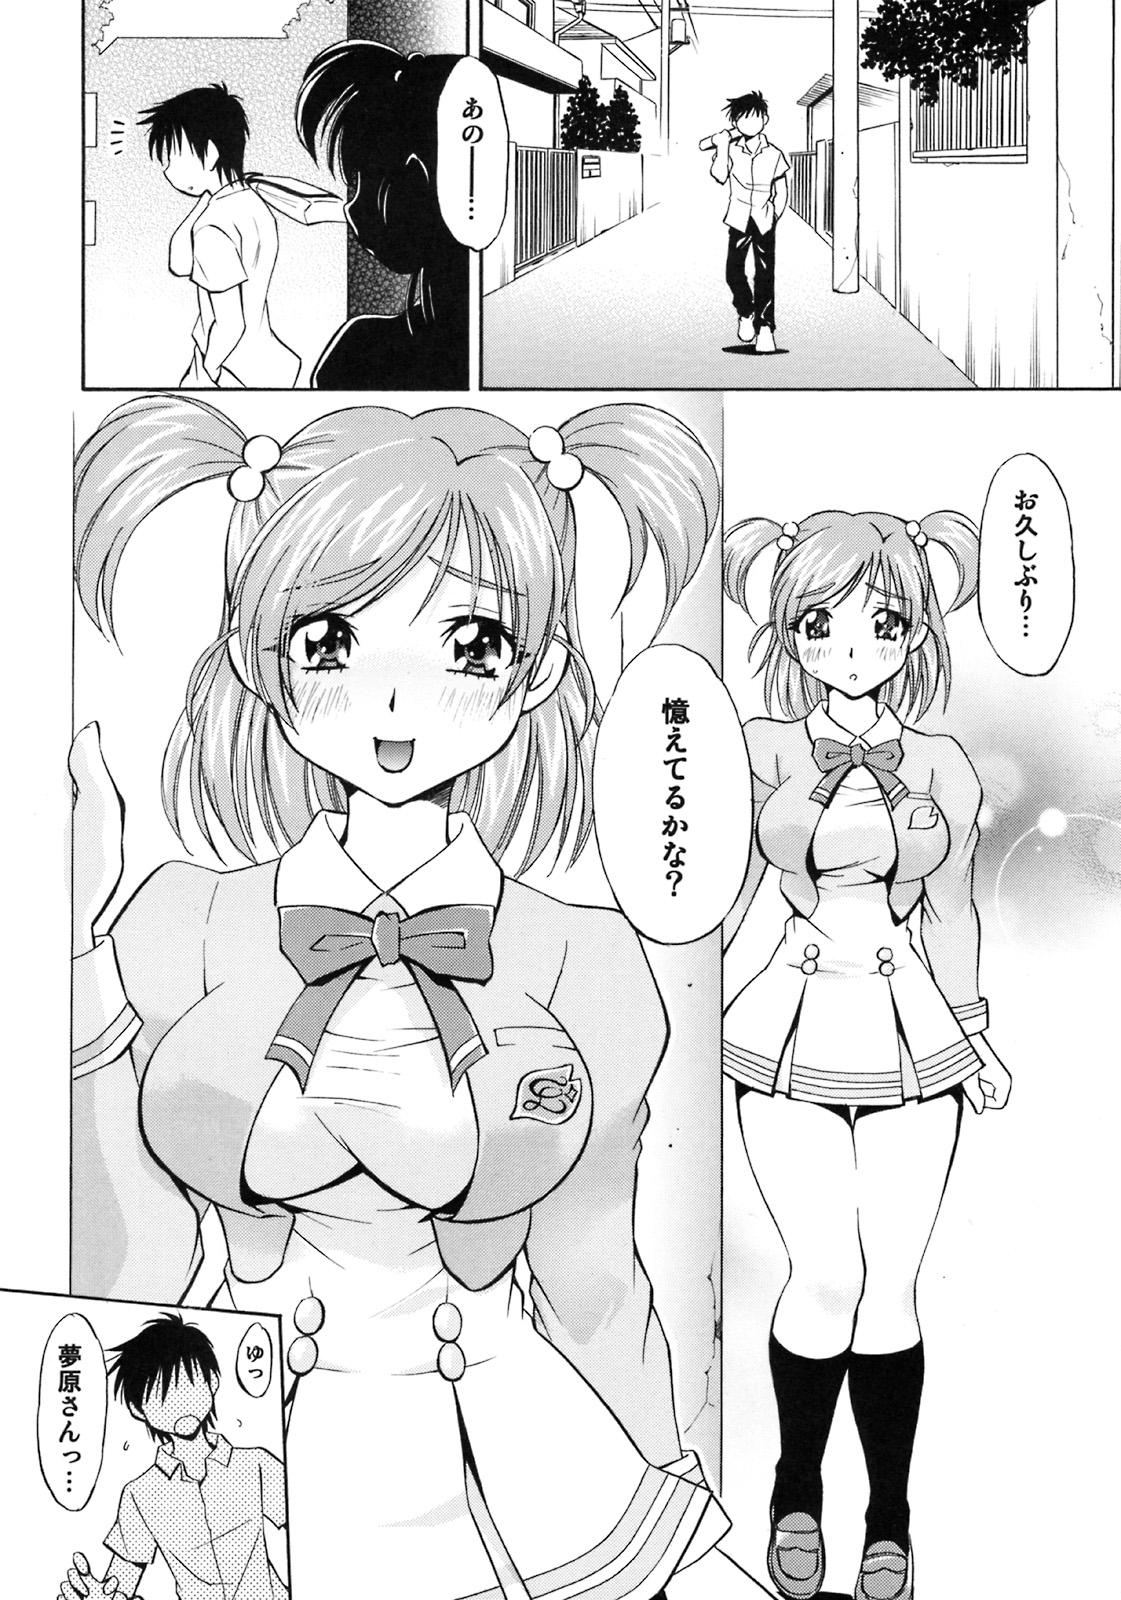 Self Cure Musume Karen & Nozomi - Yes precure 5 Analsex - Page 5